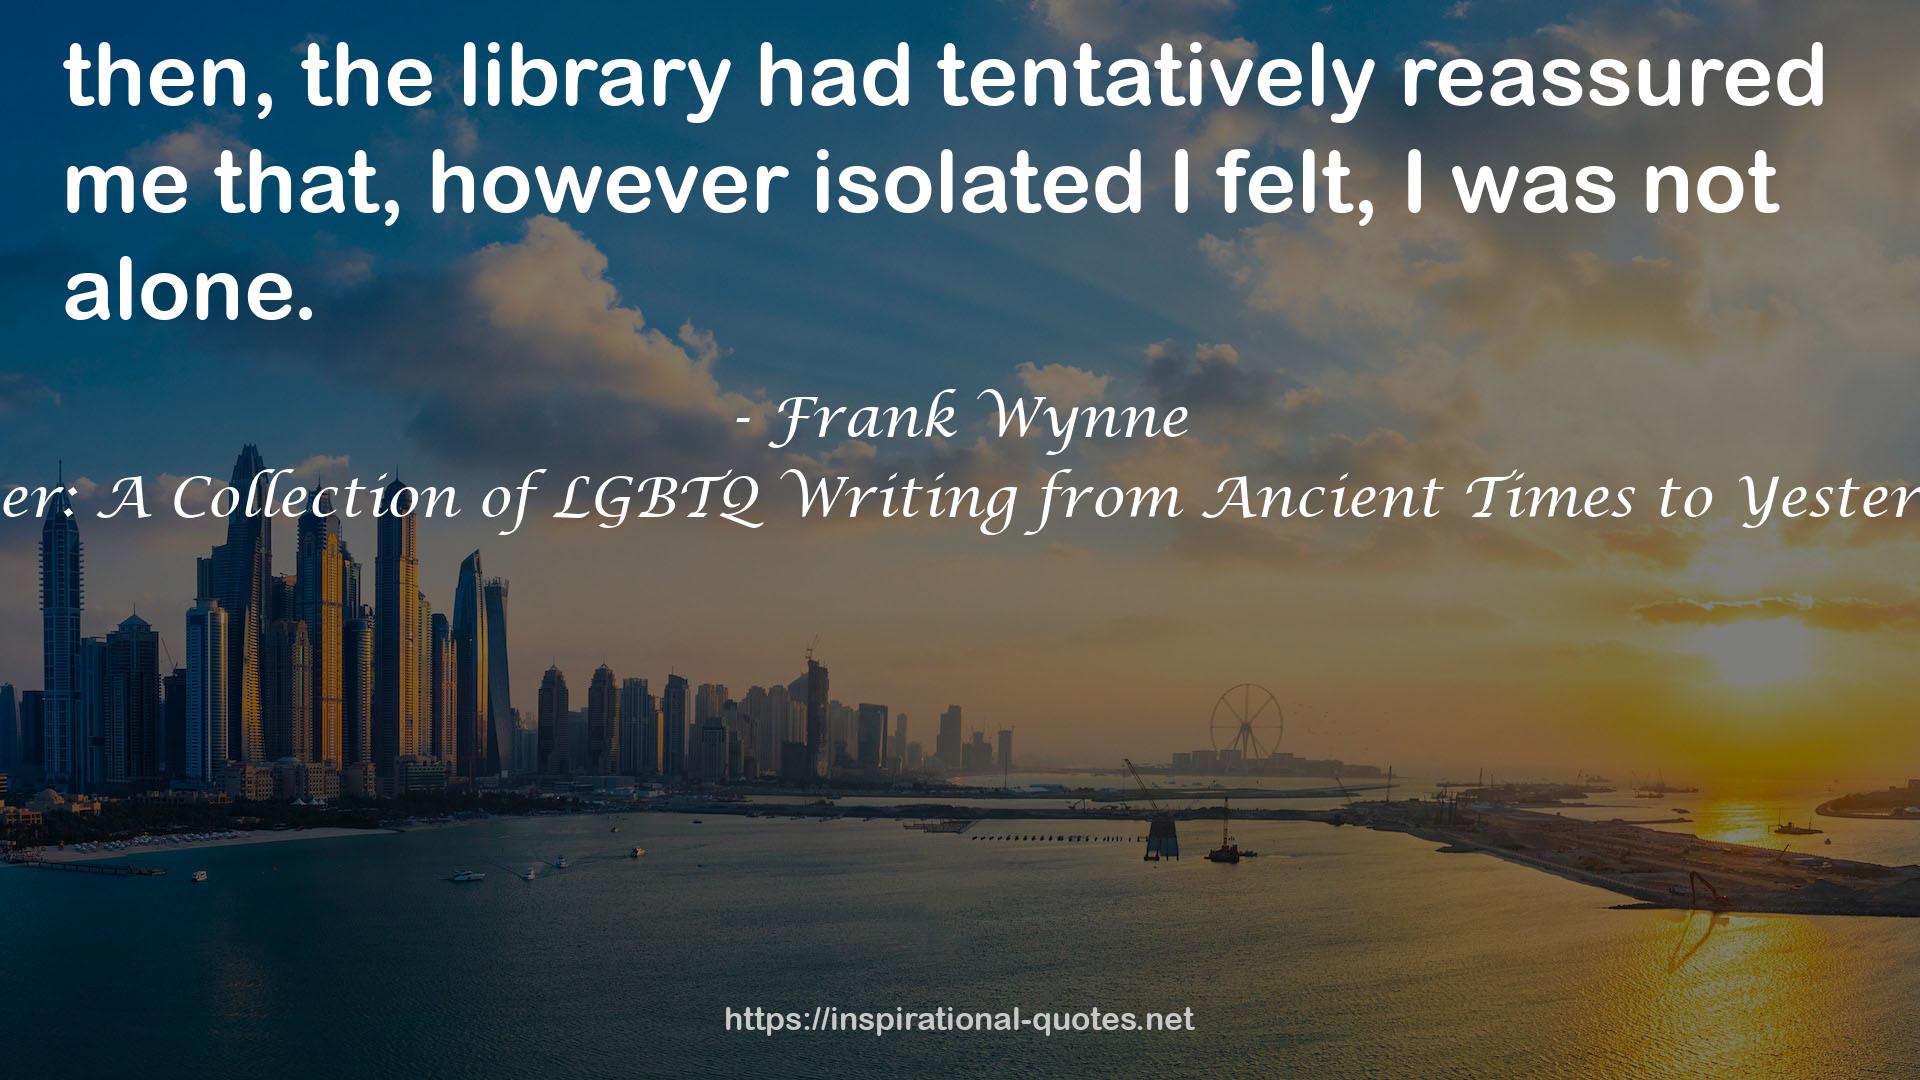 Queer: A Collection of LGBTQ Writing from Ancient Times to Yesterday QUOTES